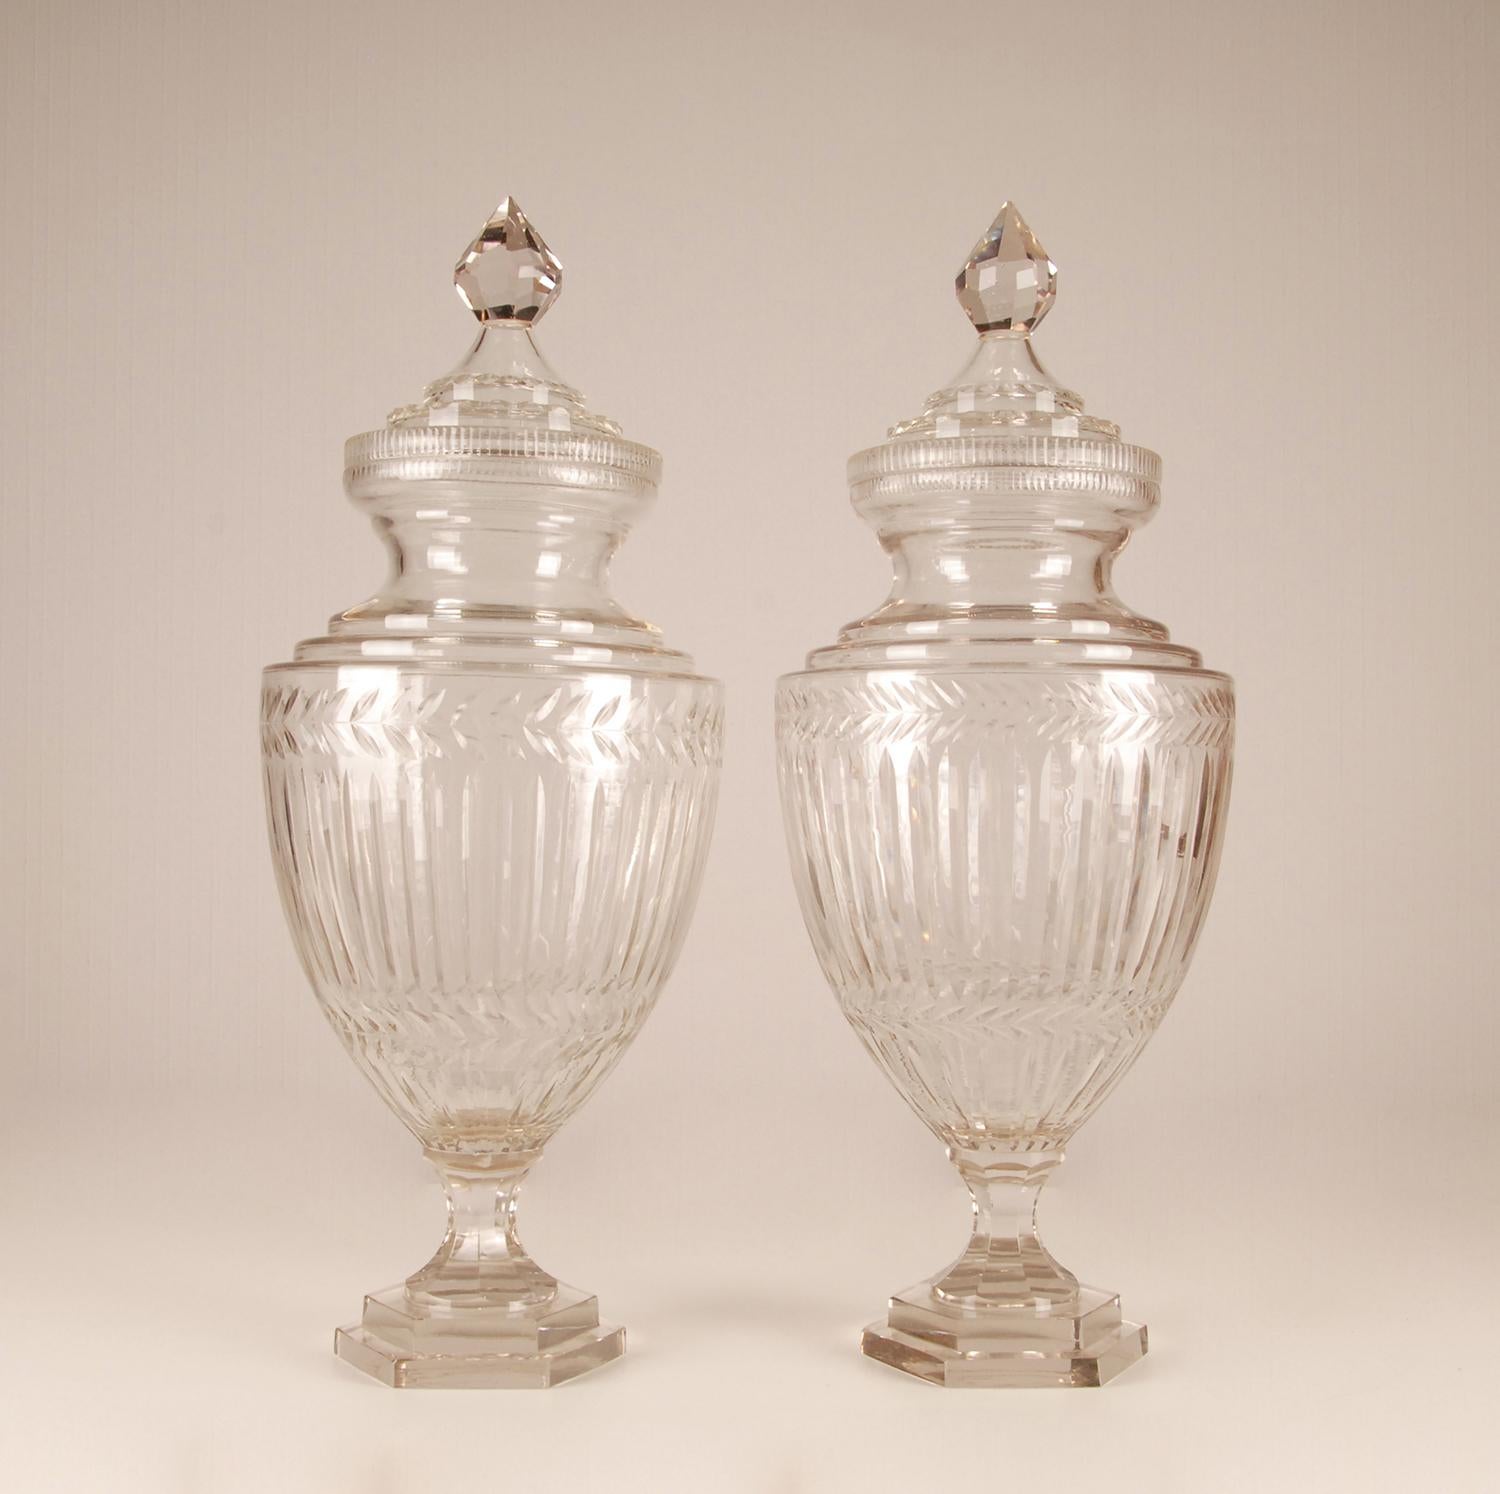 Engraved Victorian Tall Clear Glass Covered Urns Cut Crystal Neoclassical Vases a pair For Sale